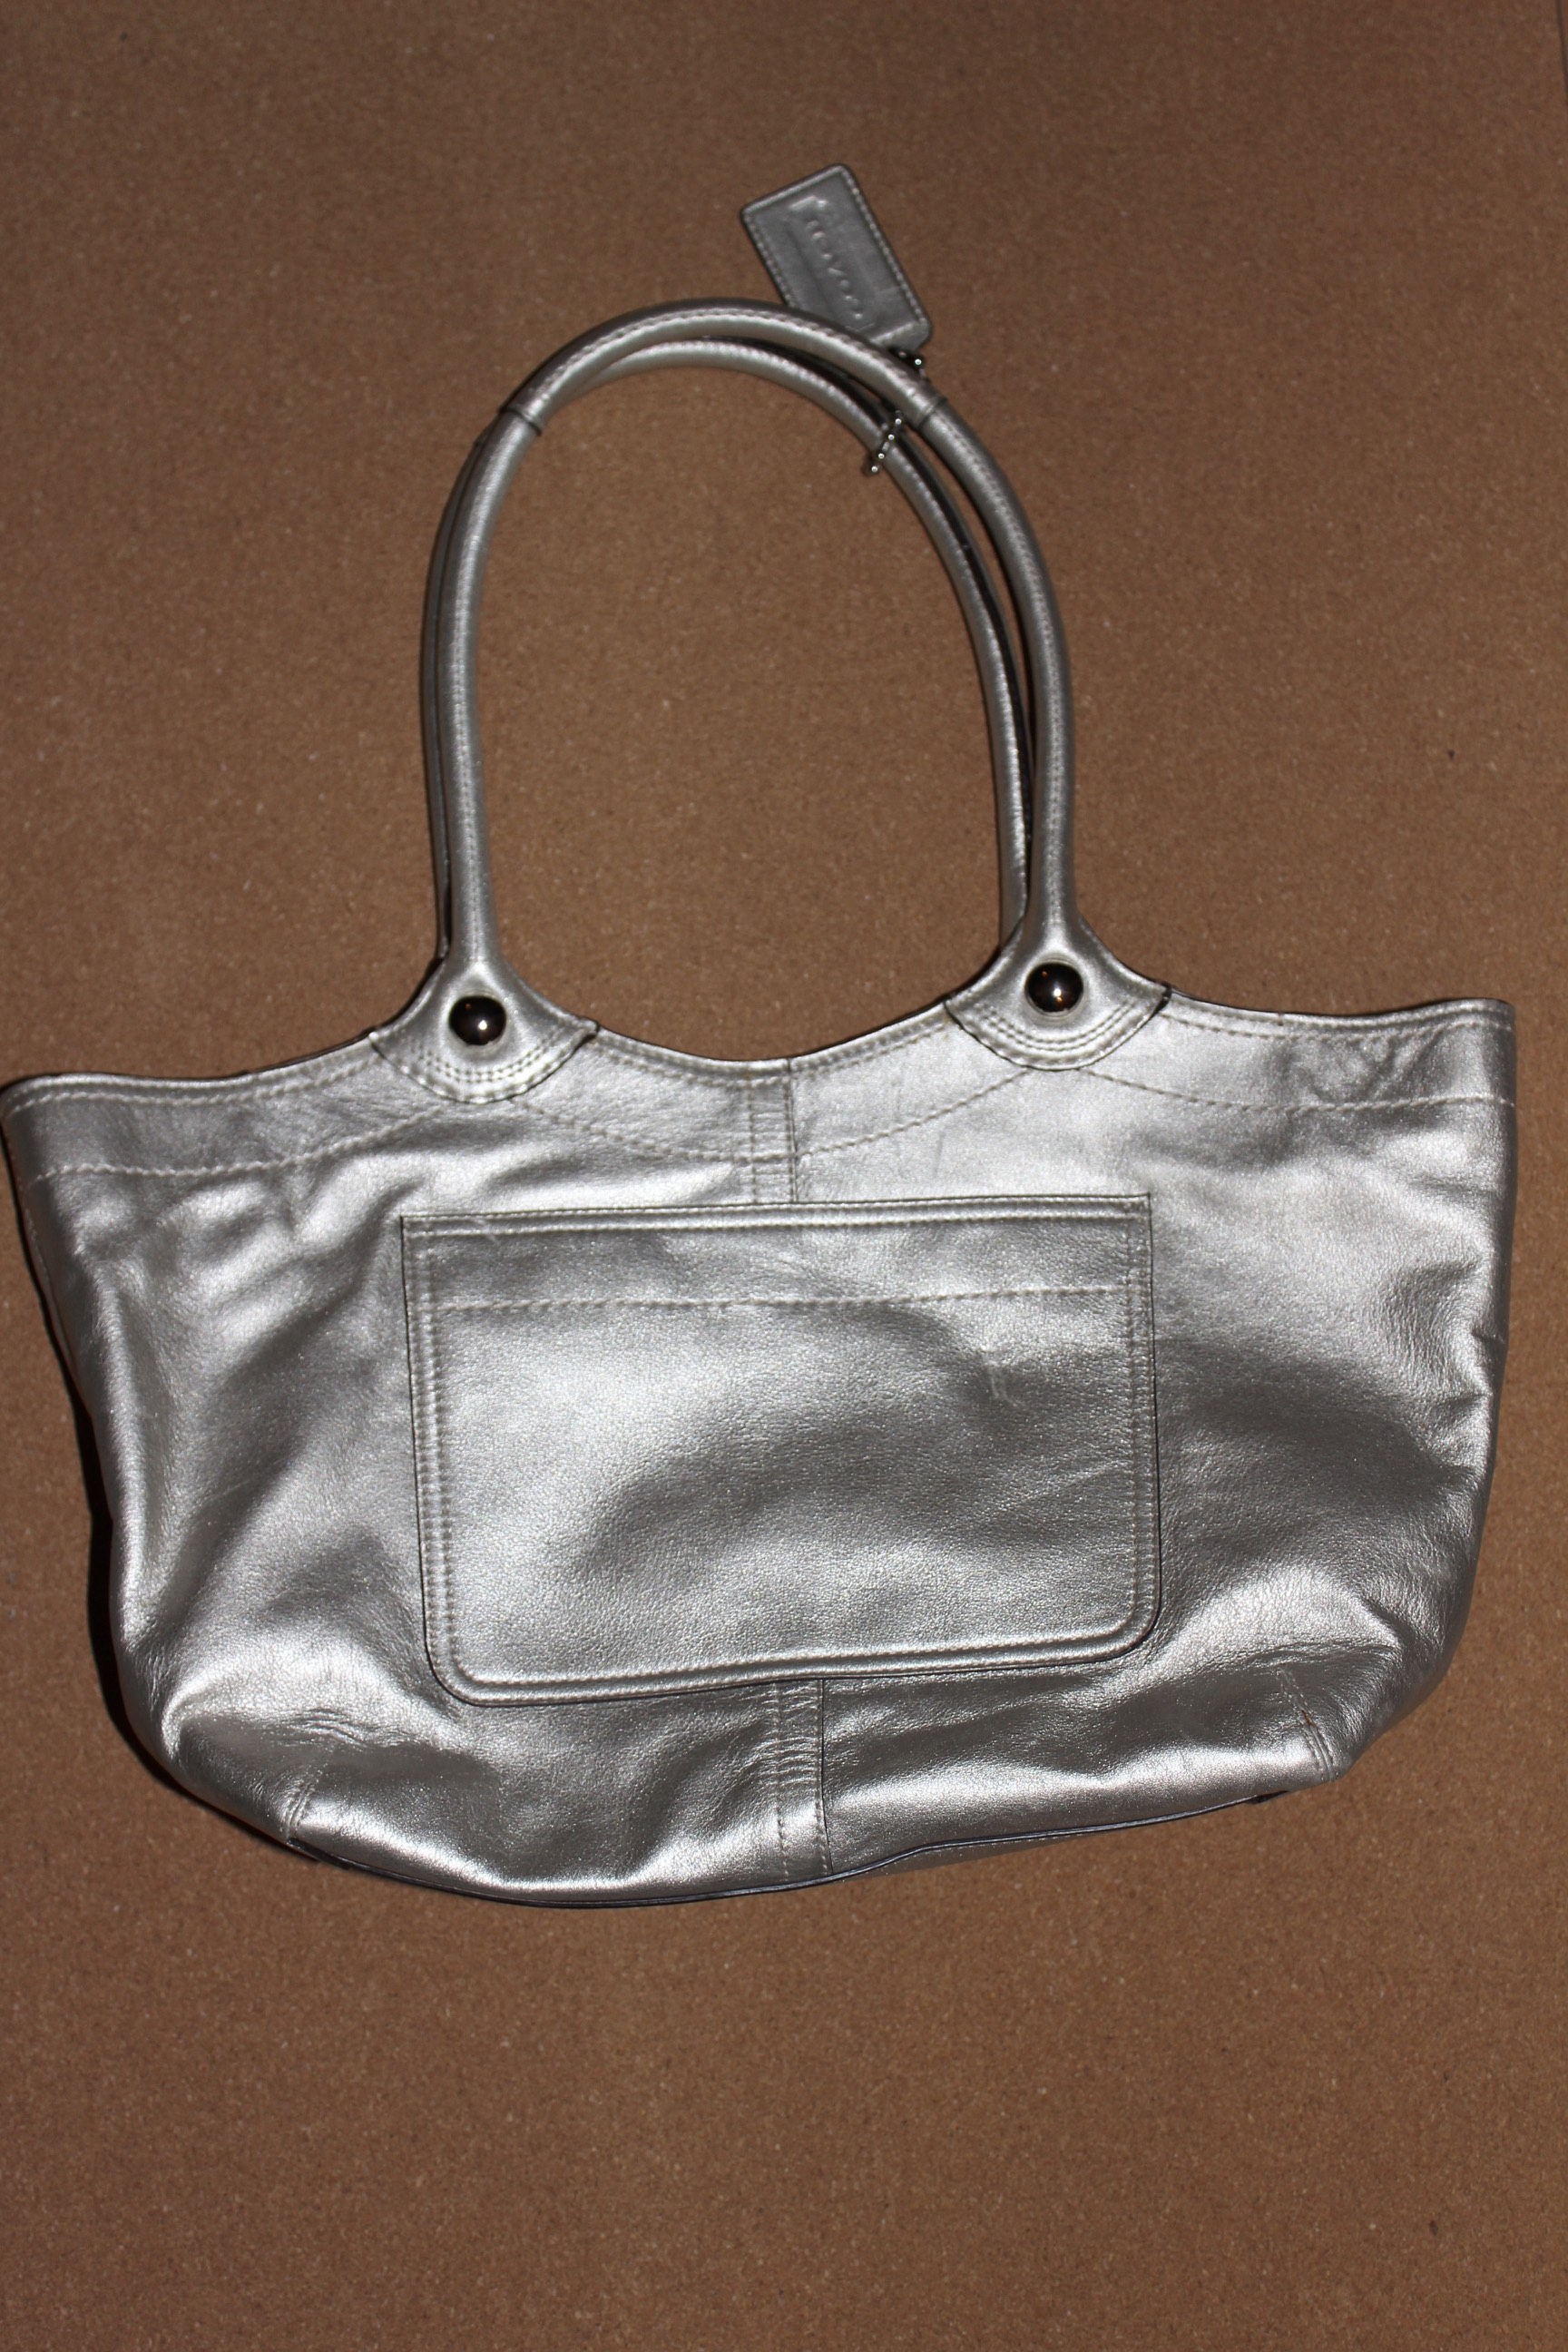 4 Gorgeous Coach Authentic Handbags - Never Used! For Sale | www.bagsaleusa.com | Classifieds